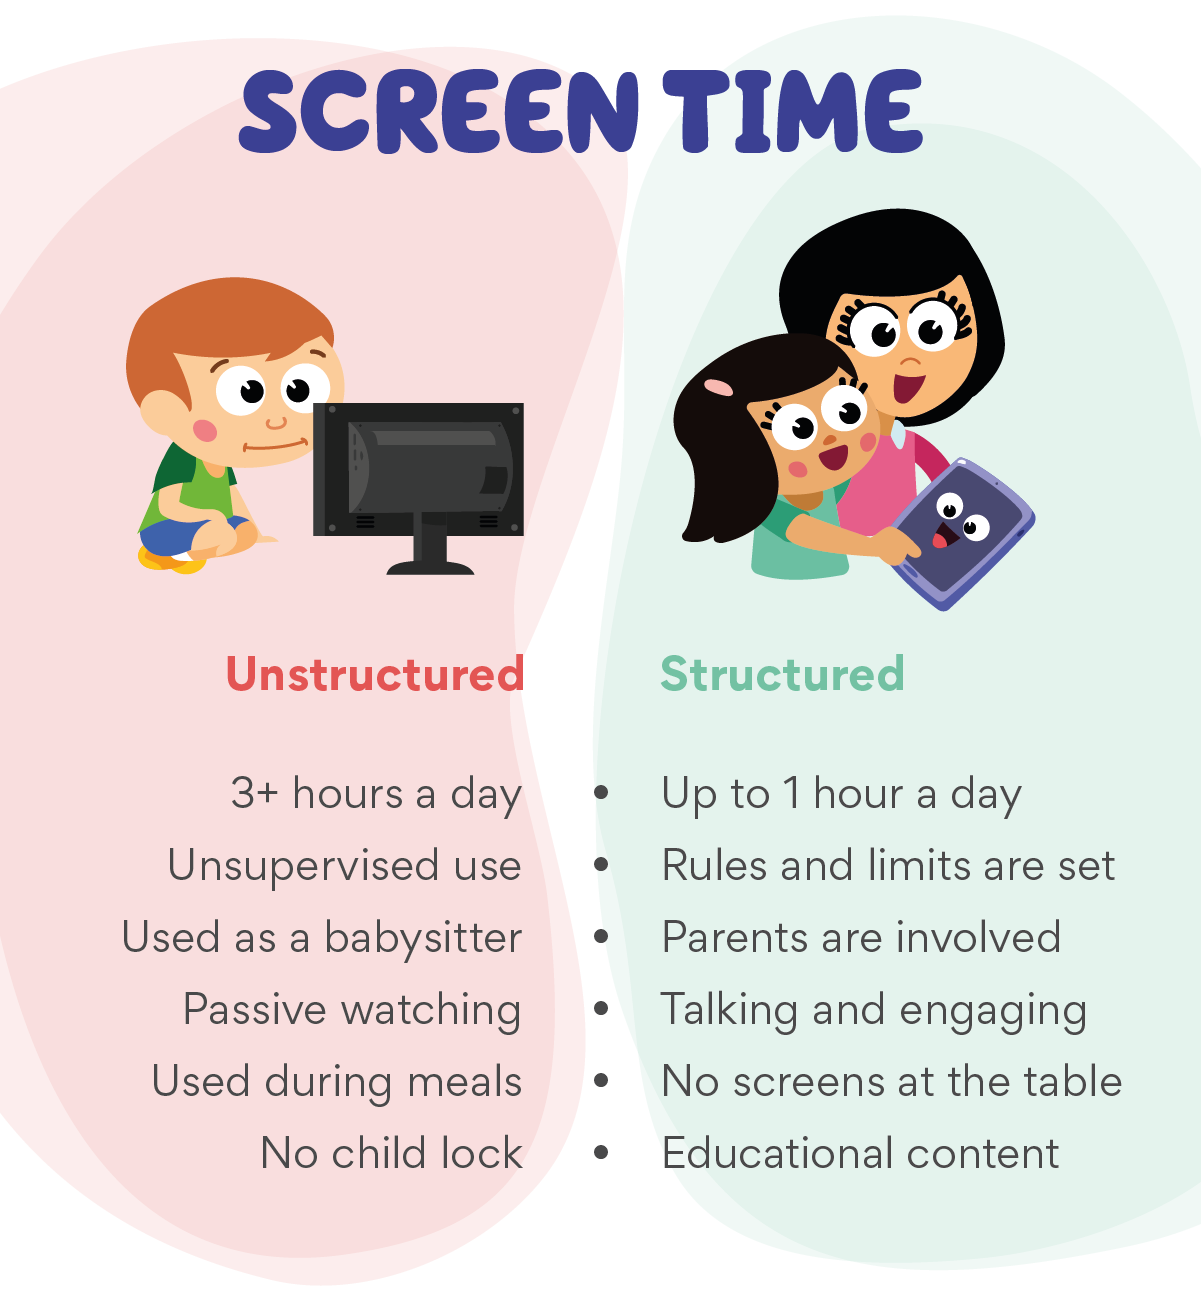 Speech Blubs is an example of structured screen time